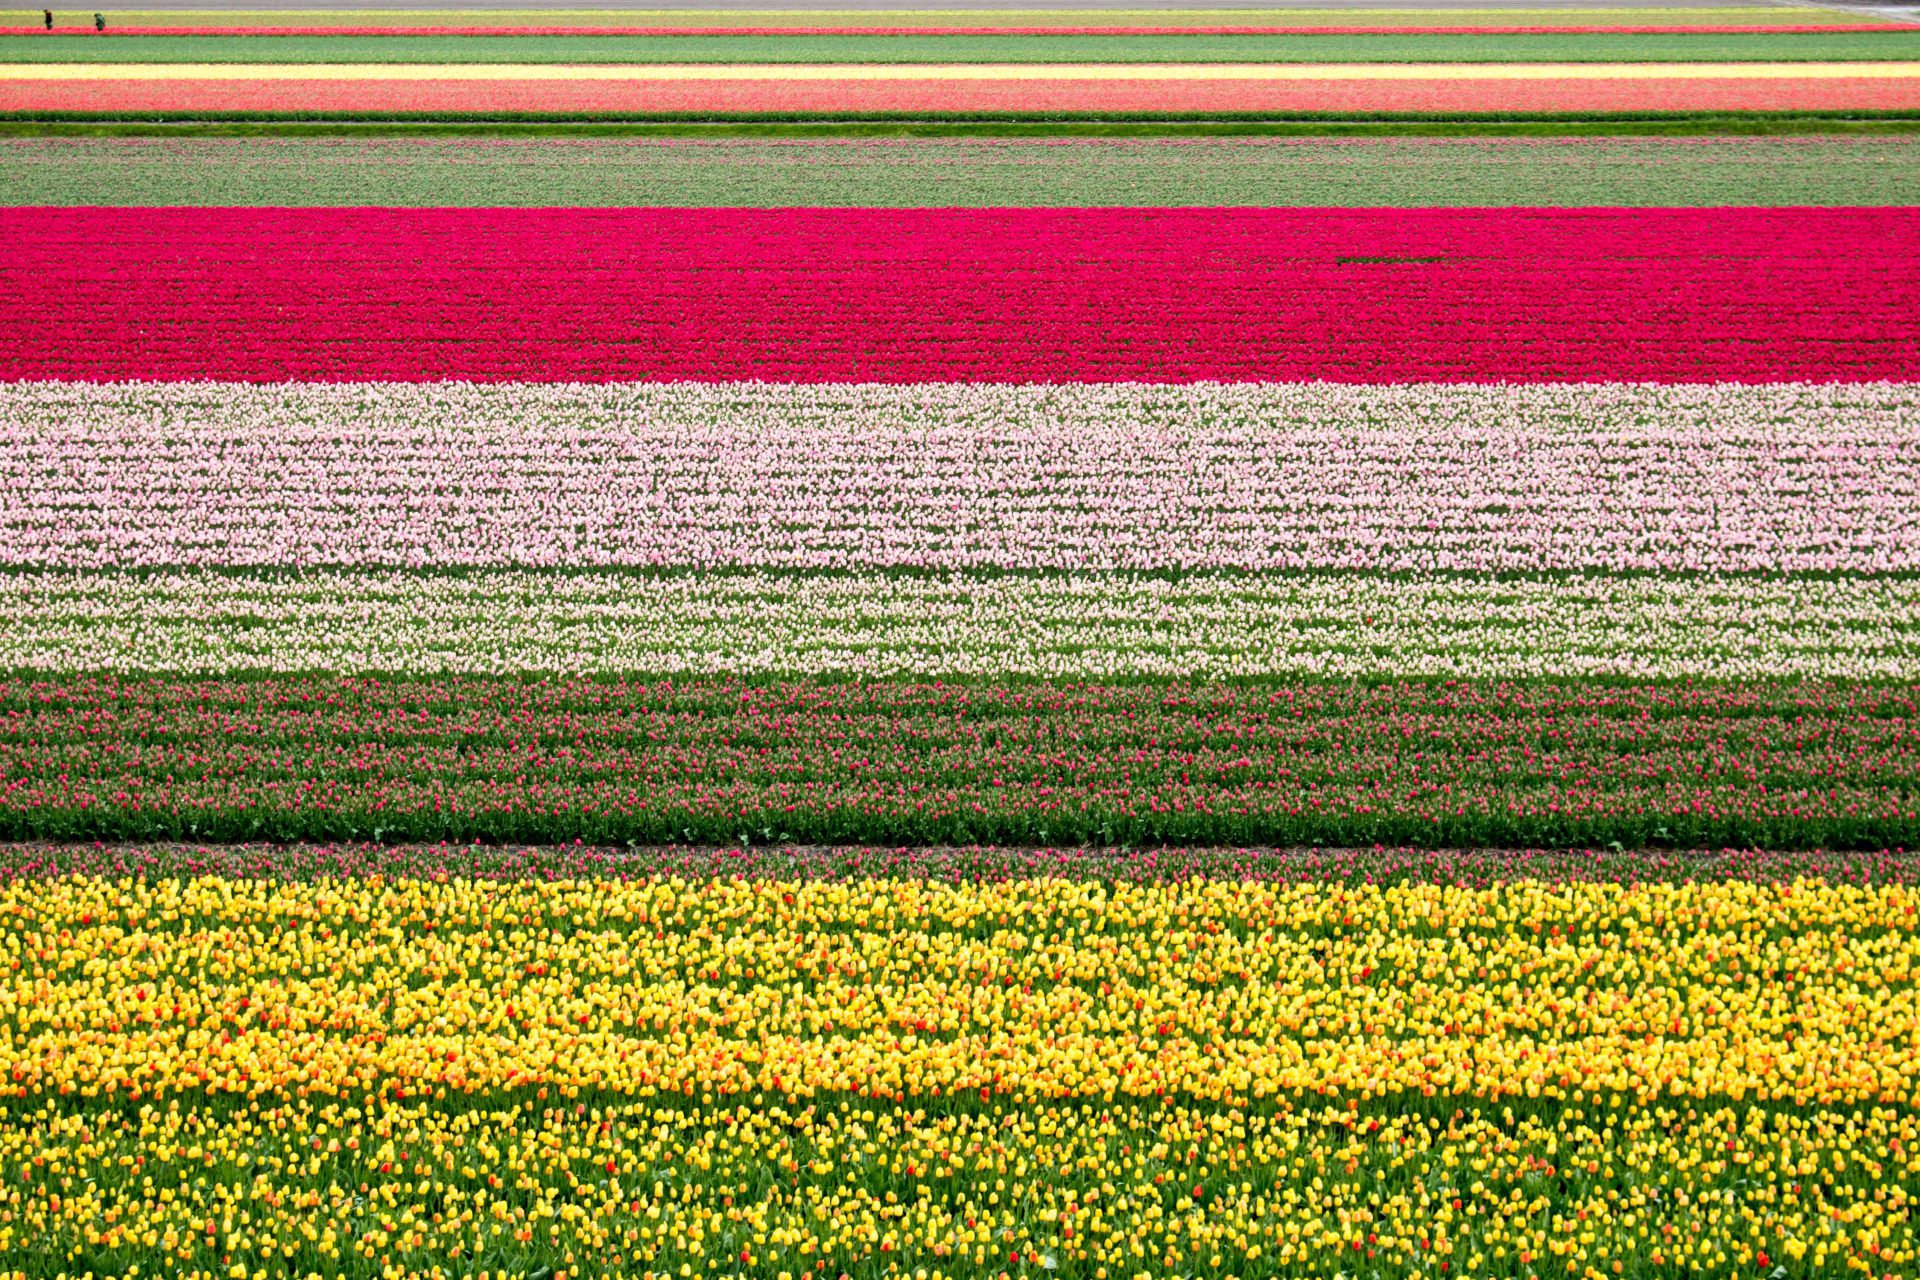 A field of flowers that is very colorful.